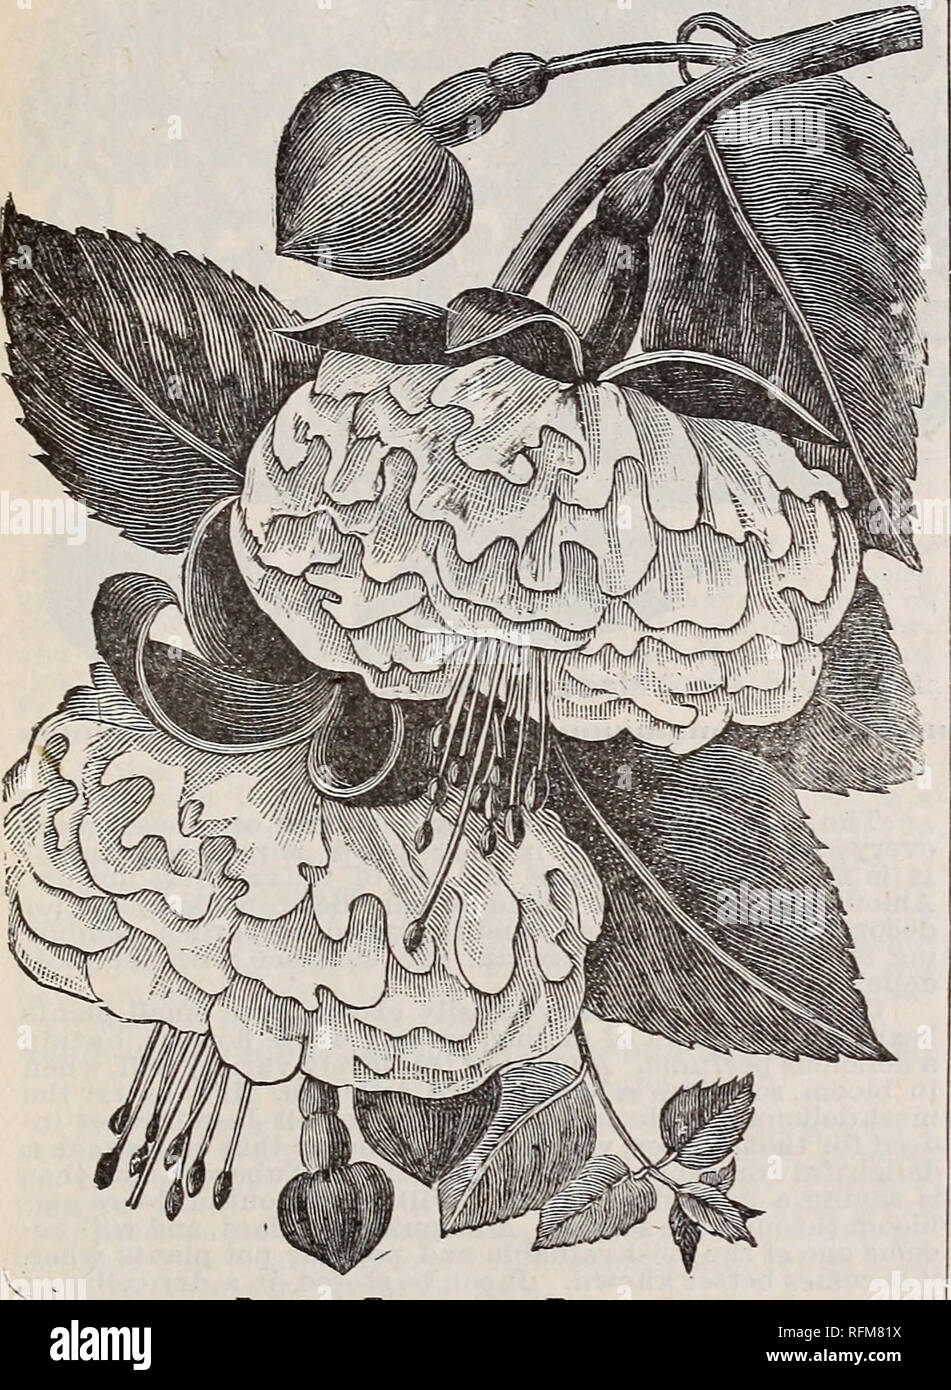 . The Geo. H. Mellen Co. : 1899. Nursery stock Ohio Catalogs; Bulbs (Plants) Catalogs; Flowers Seeds Catalogs; Plants, Ornamental Catalogs; Fruit Catalogs. Innisfalien Greenhouses, Springfield, Ohio. 45 FUCHSIAS O-OO-OO-OO-O-OOOOO-O-O-O-O-OO-O-O-O-O-O' The Fuchias, aliknow, are elegant flowers, delicate in coloring and exuuisitely graceful in form. There are many partially shaded sides of the garden where they succeed admirably, more especially if the soil is made rich and they have, occasionally, a good soaking of water. It is not advisable to place them in a full sun, as they frequently shed Stock Photo